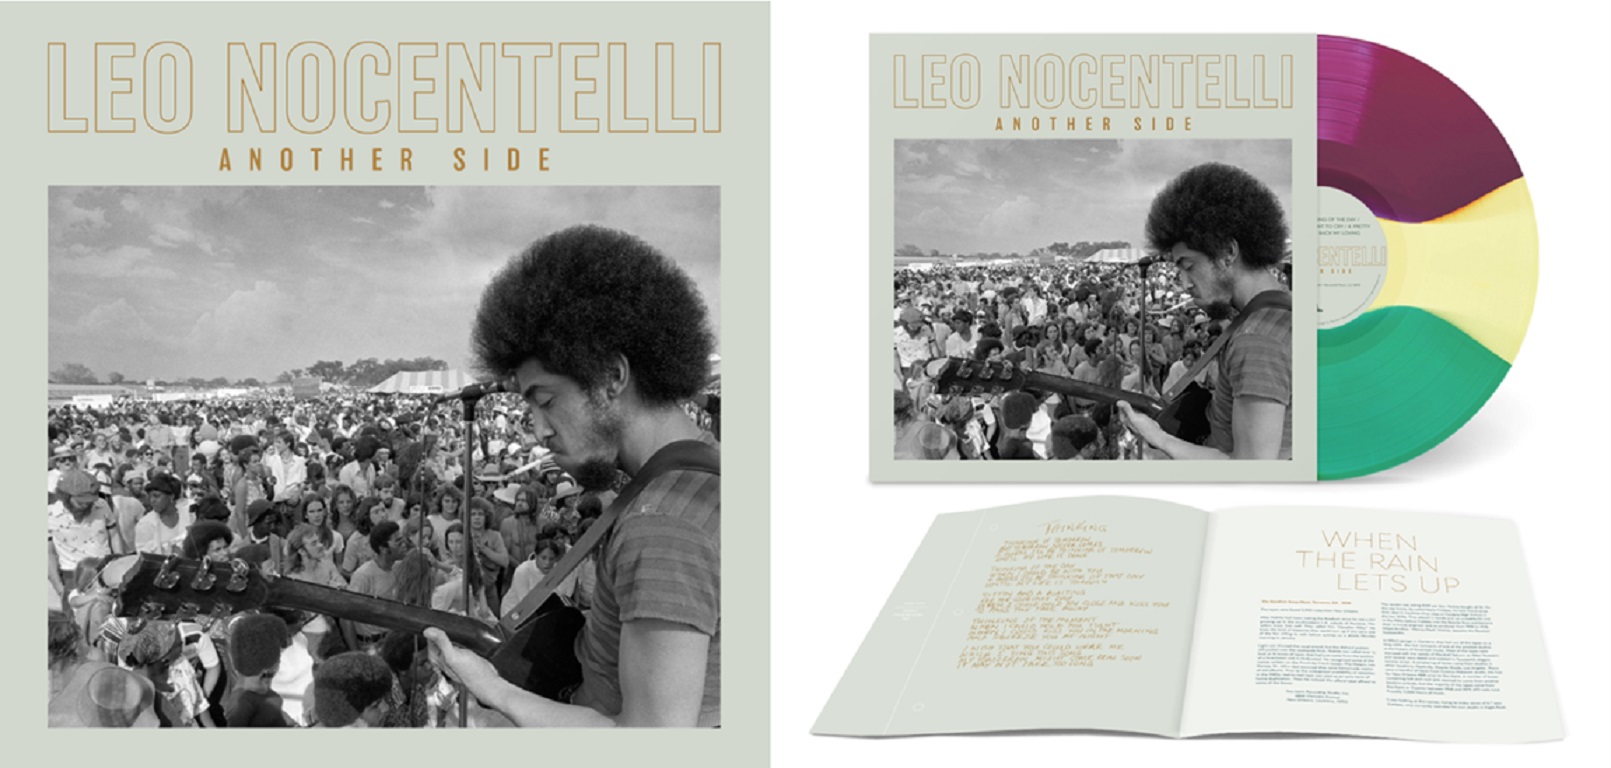 Repressing of Leo Nocentelli’s first-ever solo album coincides with Jazz Fest performance, award nomination, and more